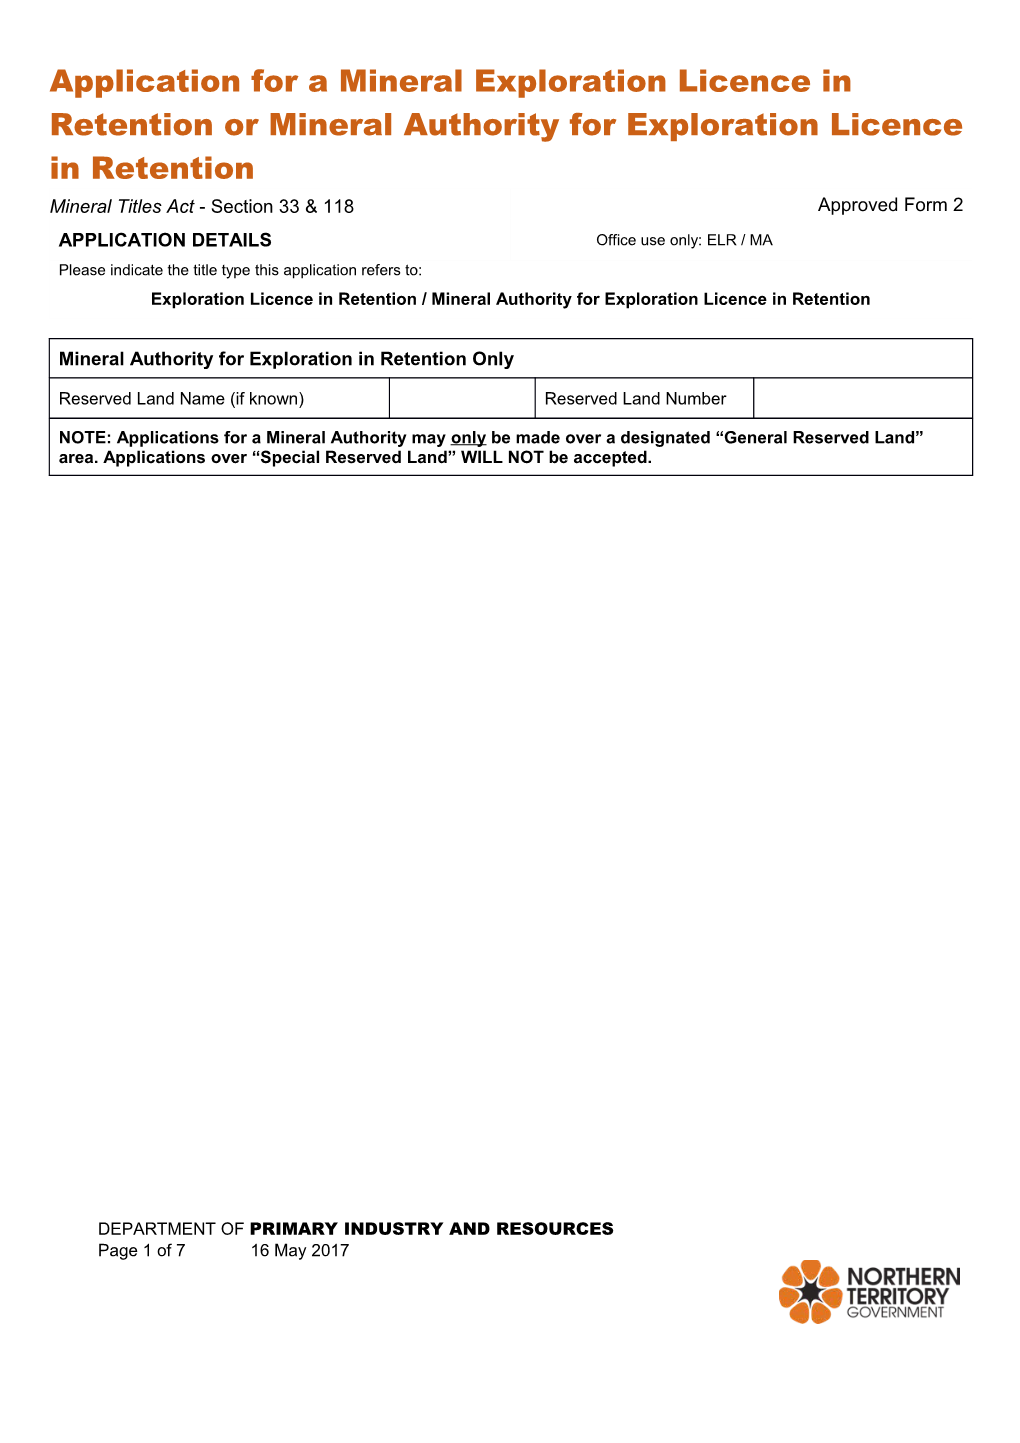 Application for a Mineral Exploration Licence in Retention Or Mineral Authority for Exploration